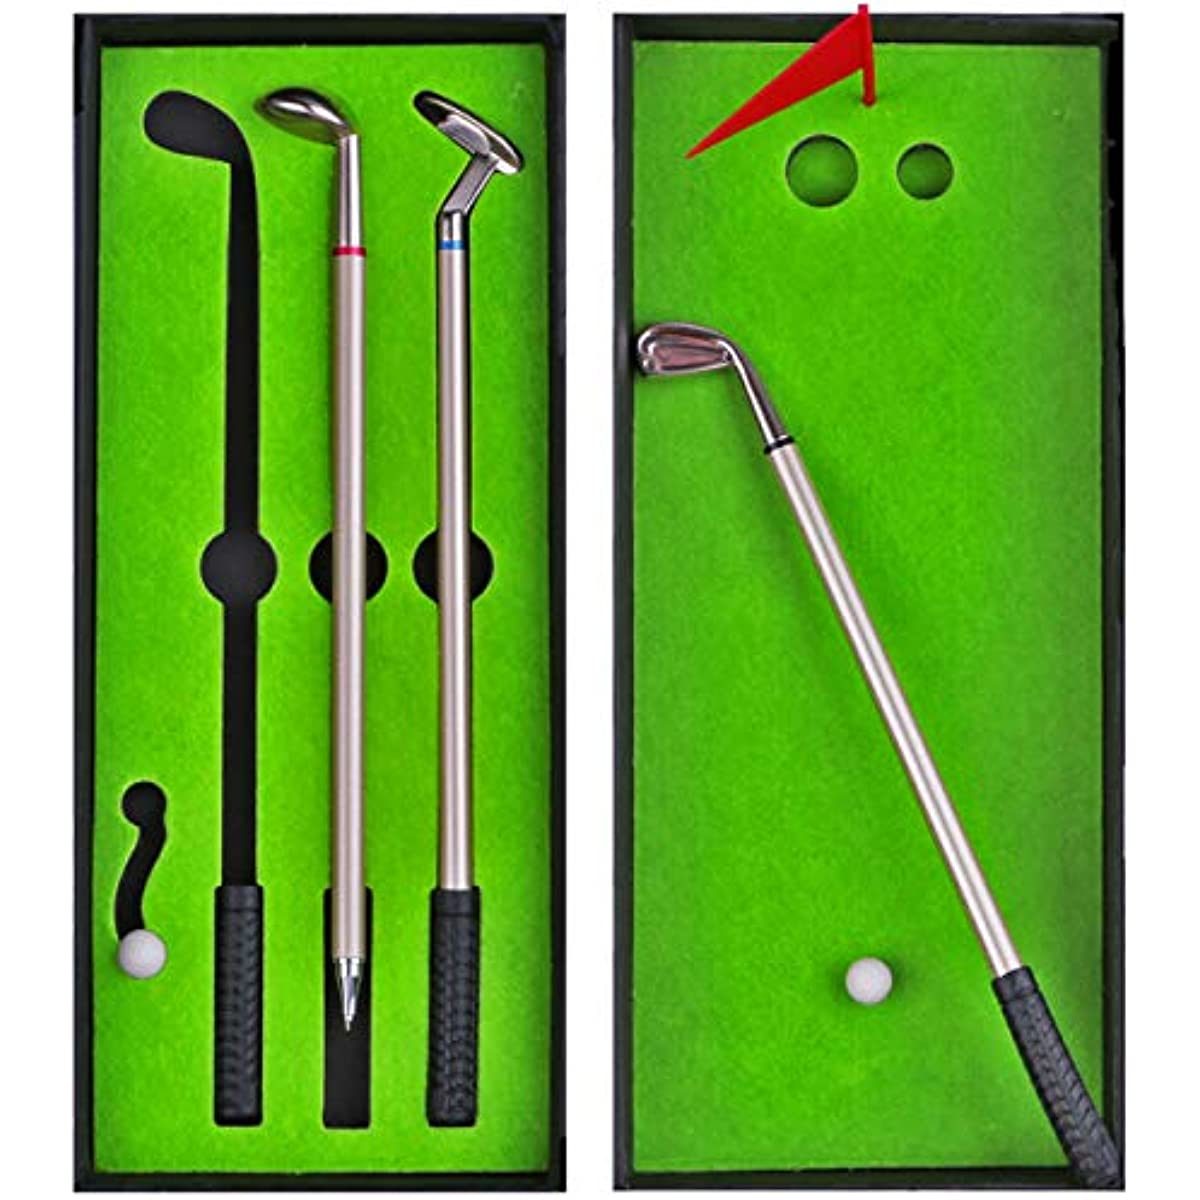 Miniature Golf Pen Gifts for Men Women Unique Christmas Stocking Stuffers; Dad Boss Coworkers Him Boyfriend Golfers Funny Birthday Gifts; Mini Desktop Games Fun Fidget Toys Cool Office Gadgets Desk Decor with various clubs and balls displayed in two green, lined boxes, one with multiple clubs and the other featuring a single club and two holes – a unique novelty gift for any golf enthusiast